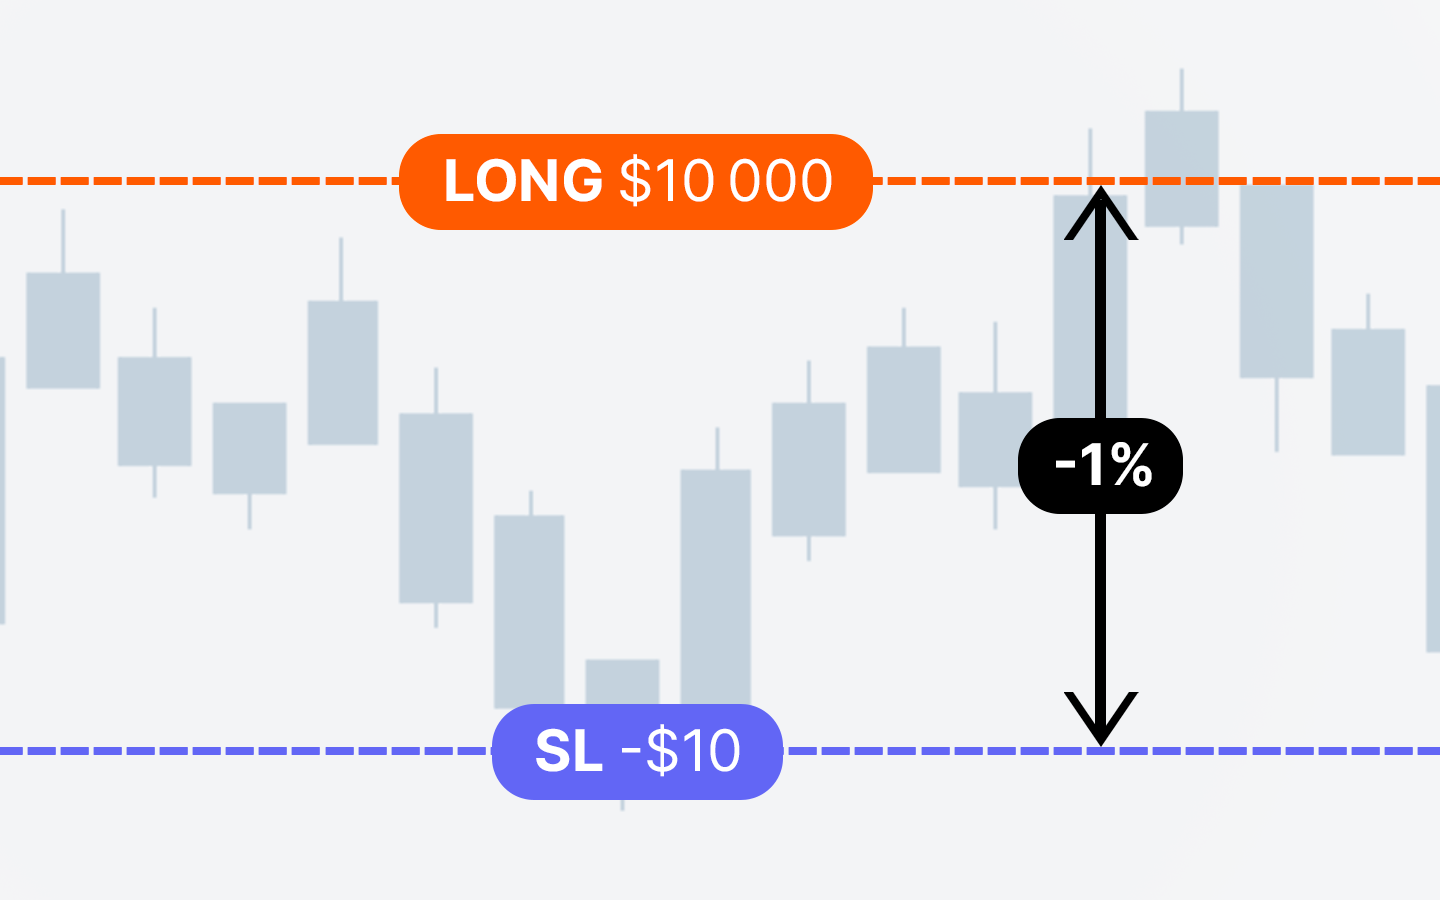 Stop Loss according to risk